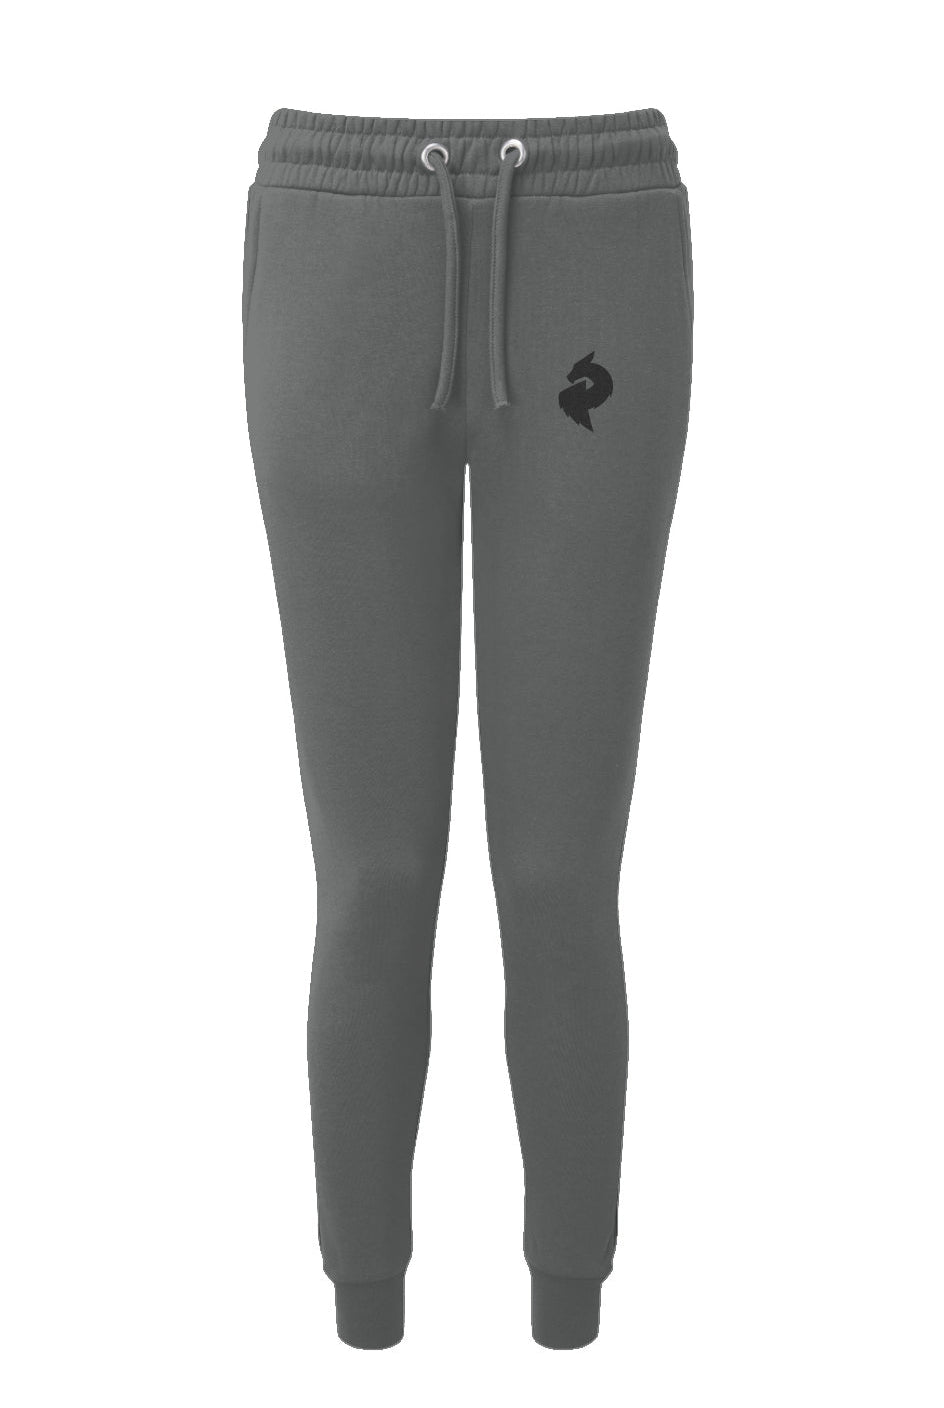 Dragon Foxx™ Women's Charcoal Yoga Fitted Jogger - Women's Yoga Fitted Jogger - Apliiq - Dragon Foxx™ Women's Yoga Fitted Jogger - APQ-4378970S5A1 - xs - charcoal - Charcoal Yoga Fitted Jogger - Dragon Foxx™ - Dragon Foxx™ Women's Jogger